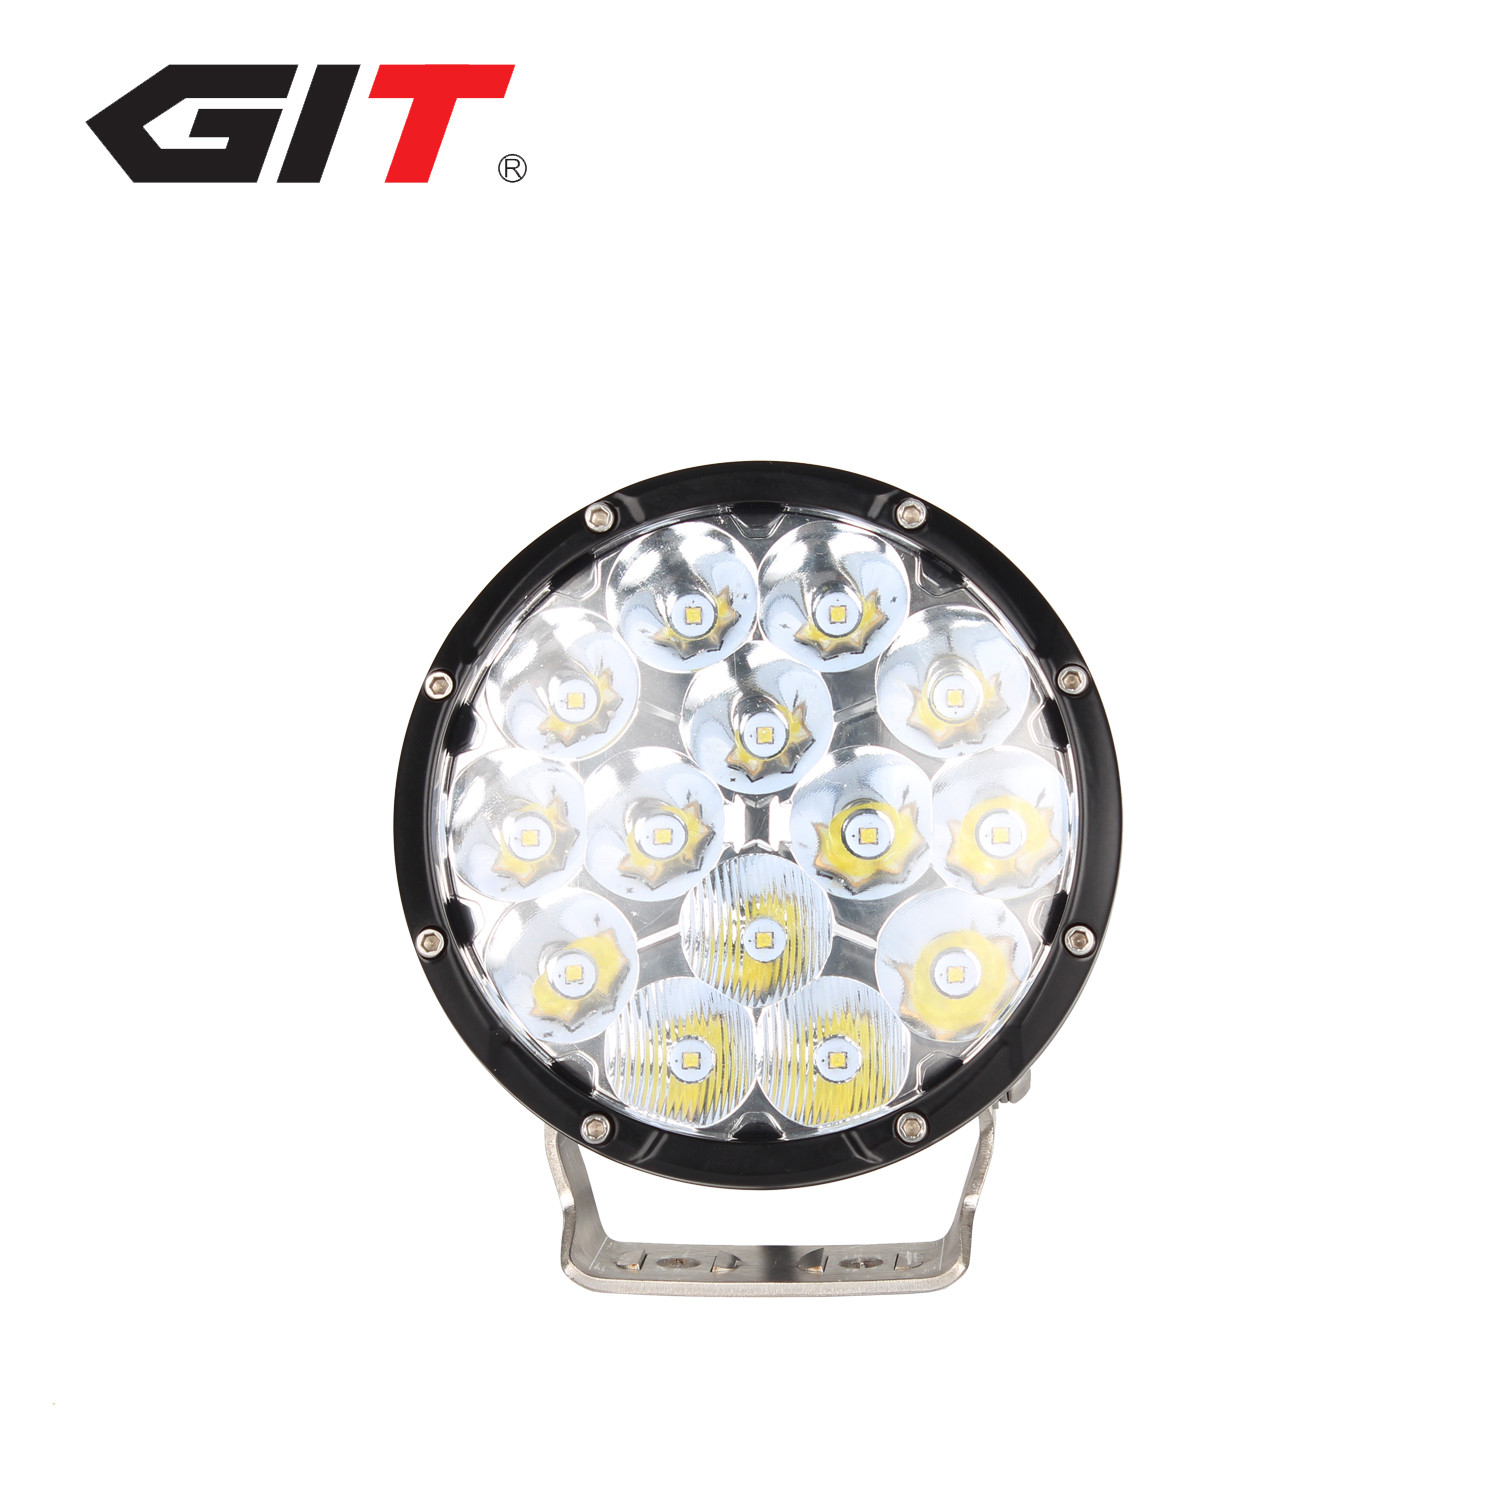 Offroad 5.4" 42W Round Osram Led Driving Light